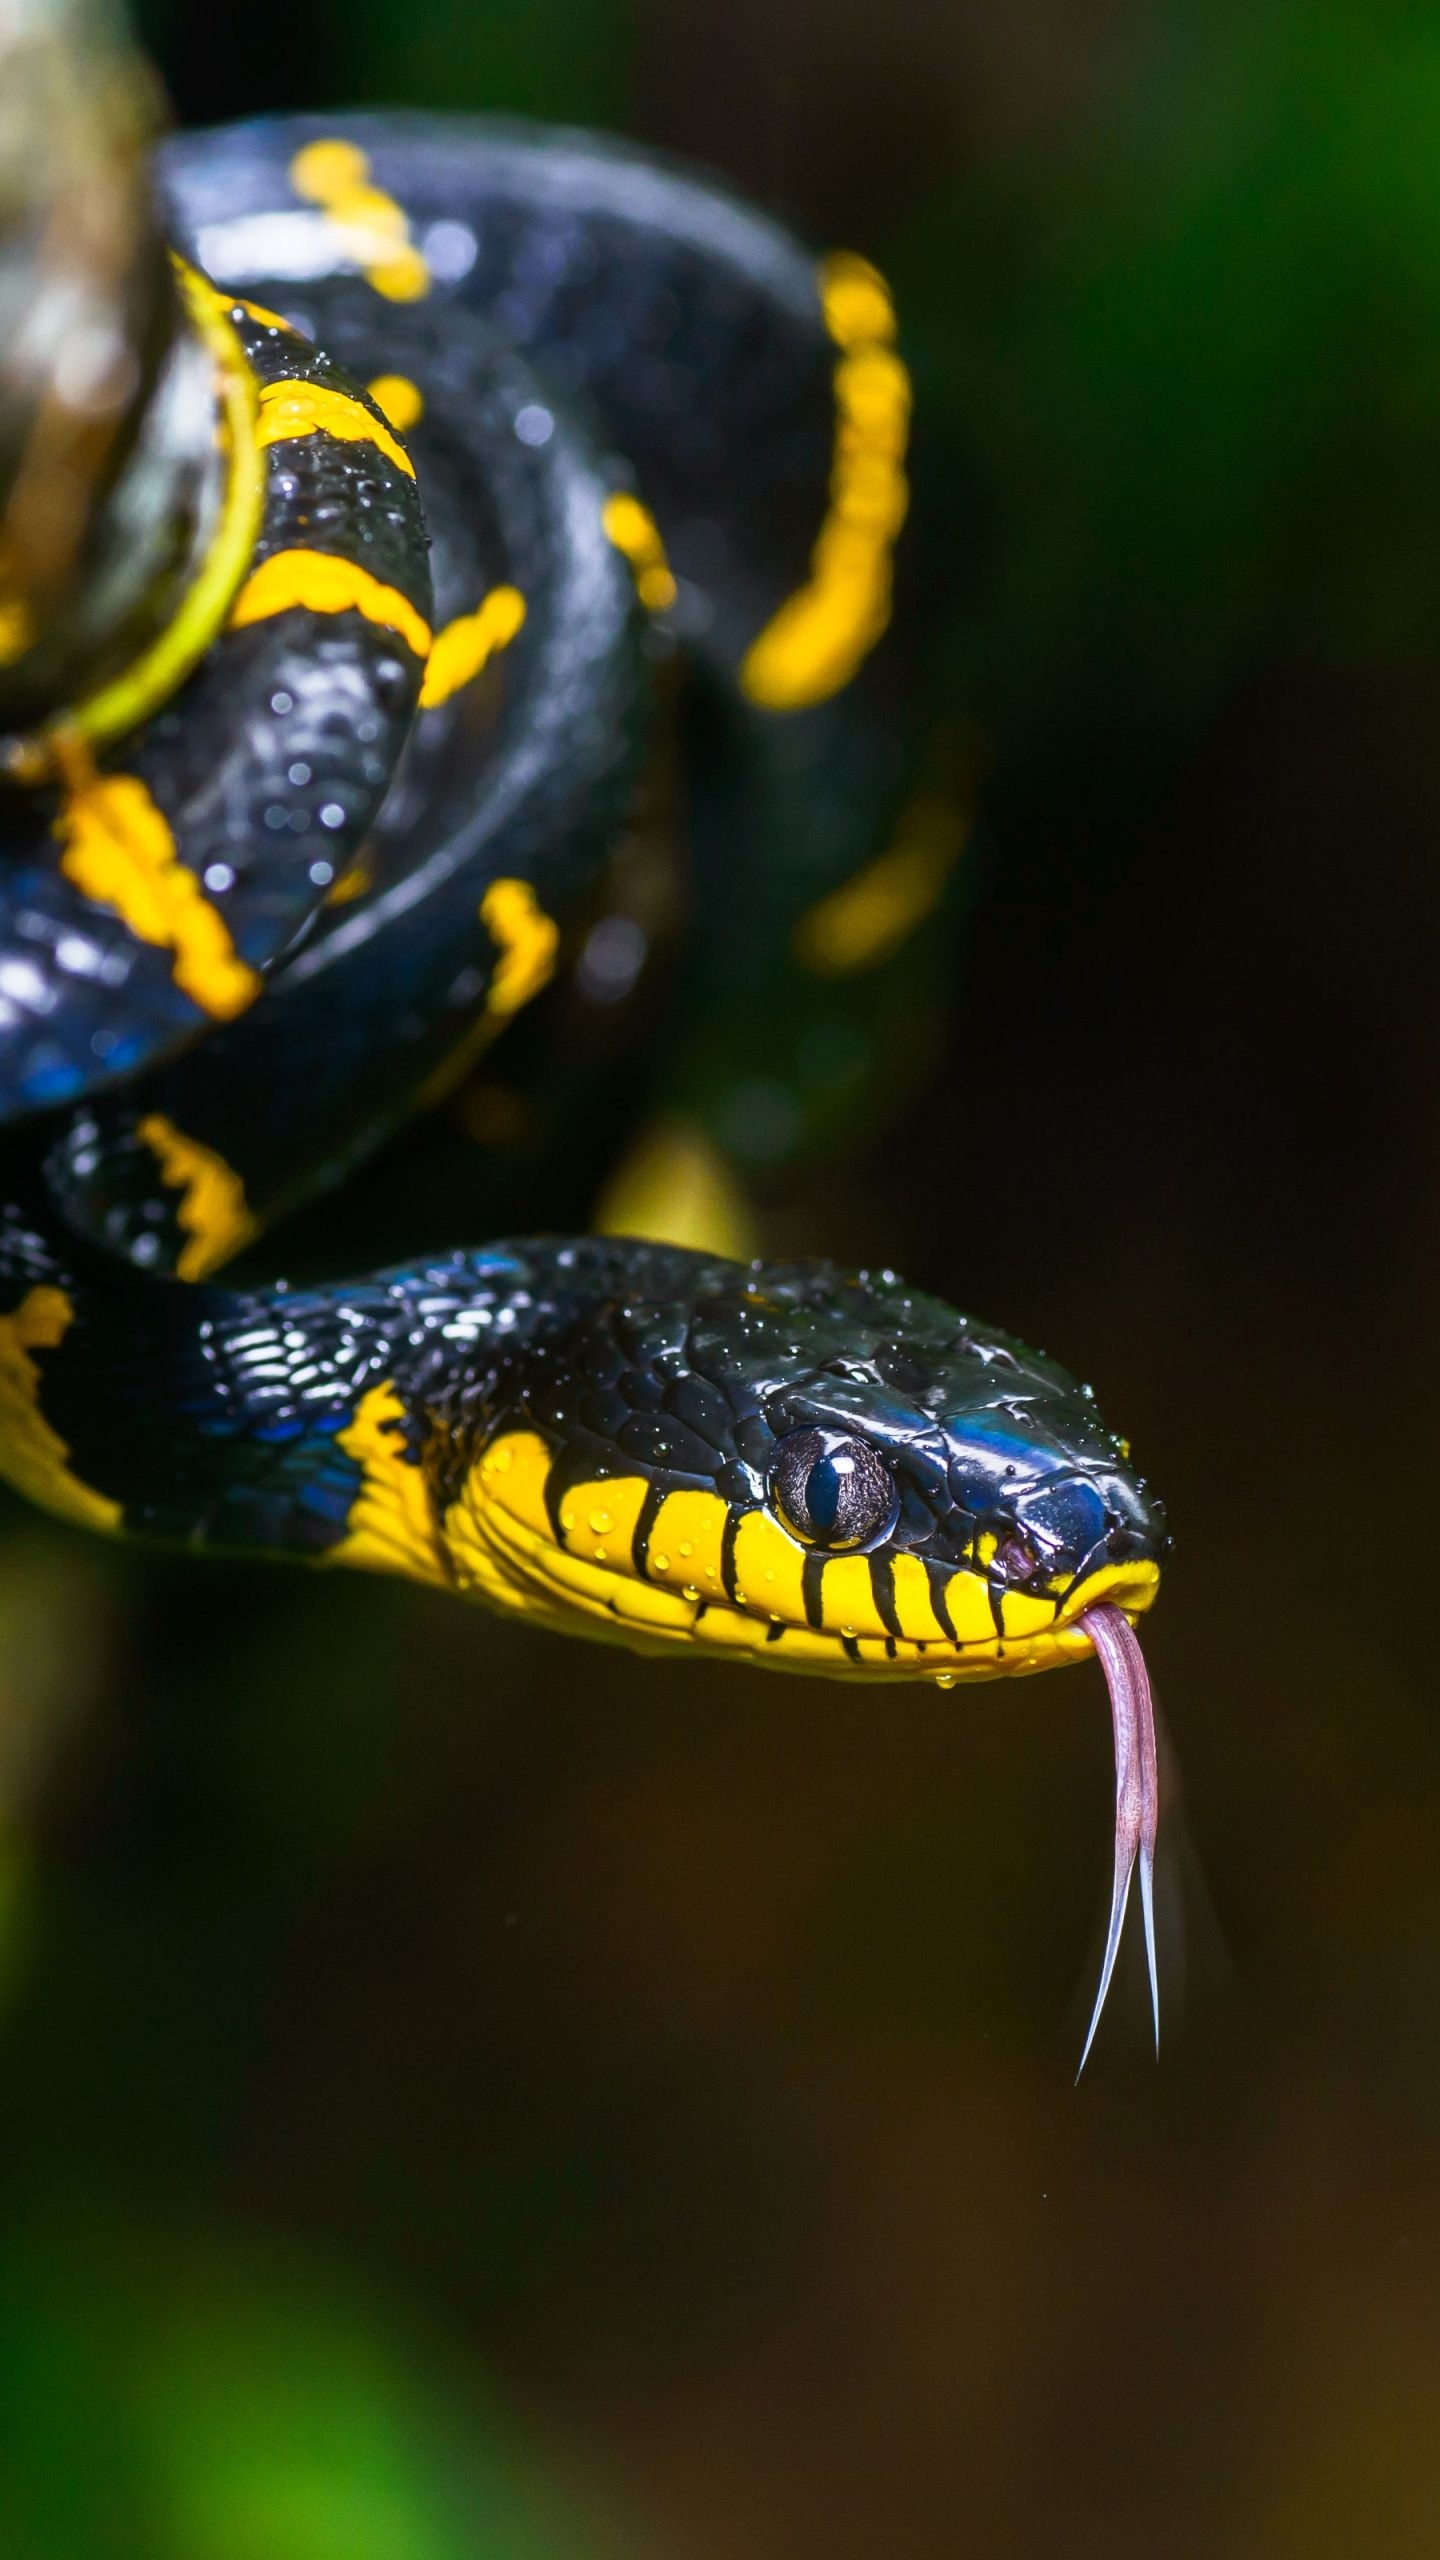 Ultra HD snakes, Reptile wallpapers, 4K serpent images, Stunning reptiles, 1440x2560 HD Phone